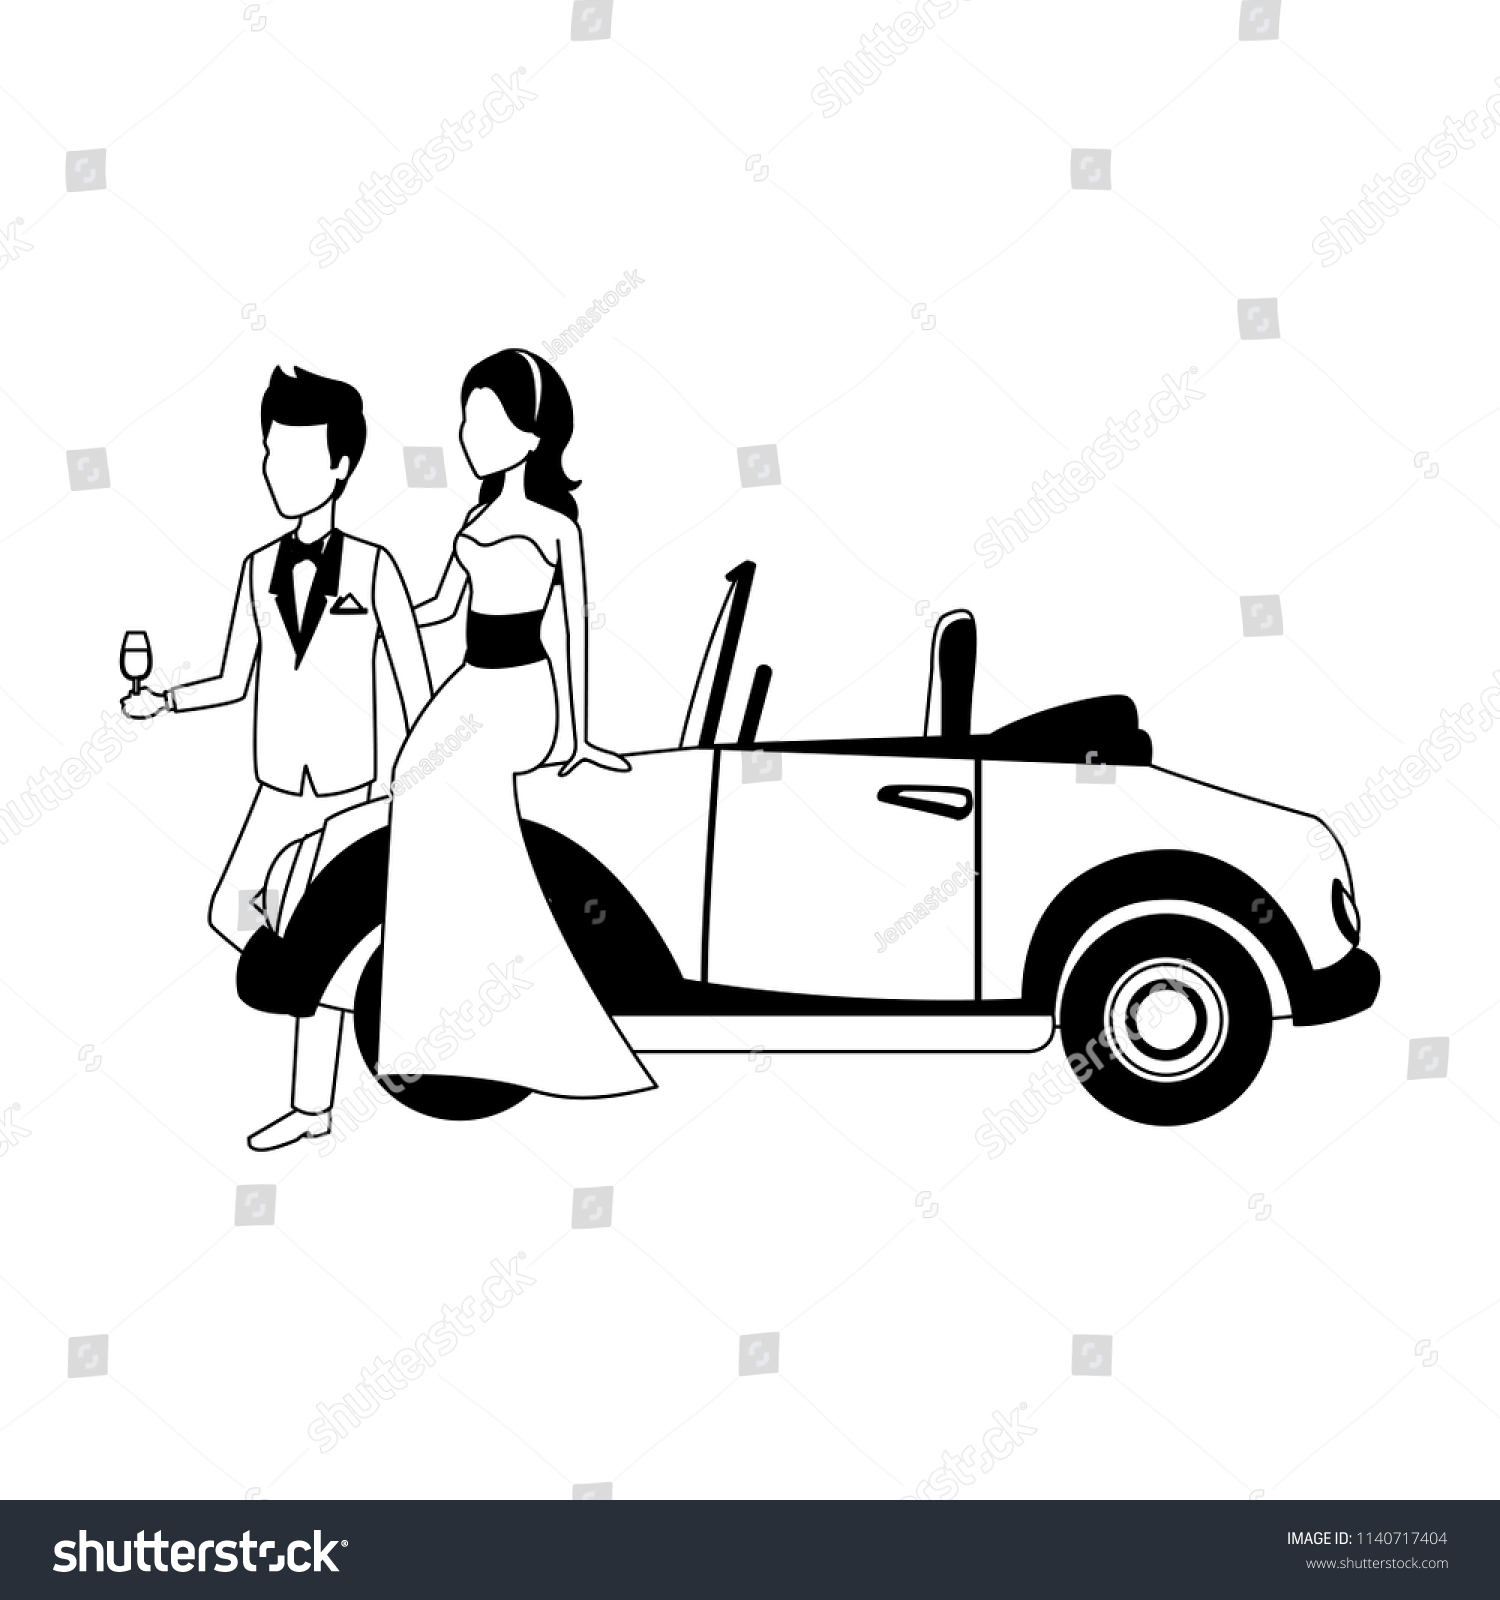 Bride and groom with sport car in black and white #1140717404